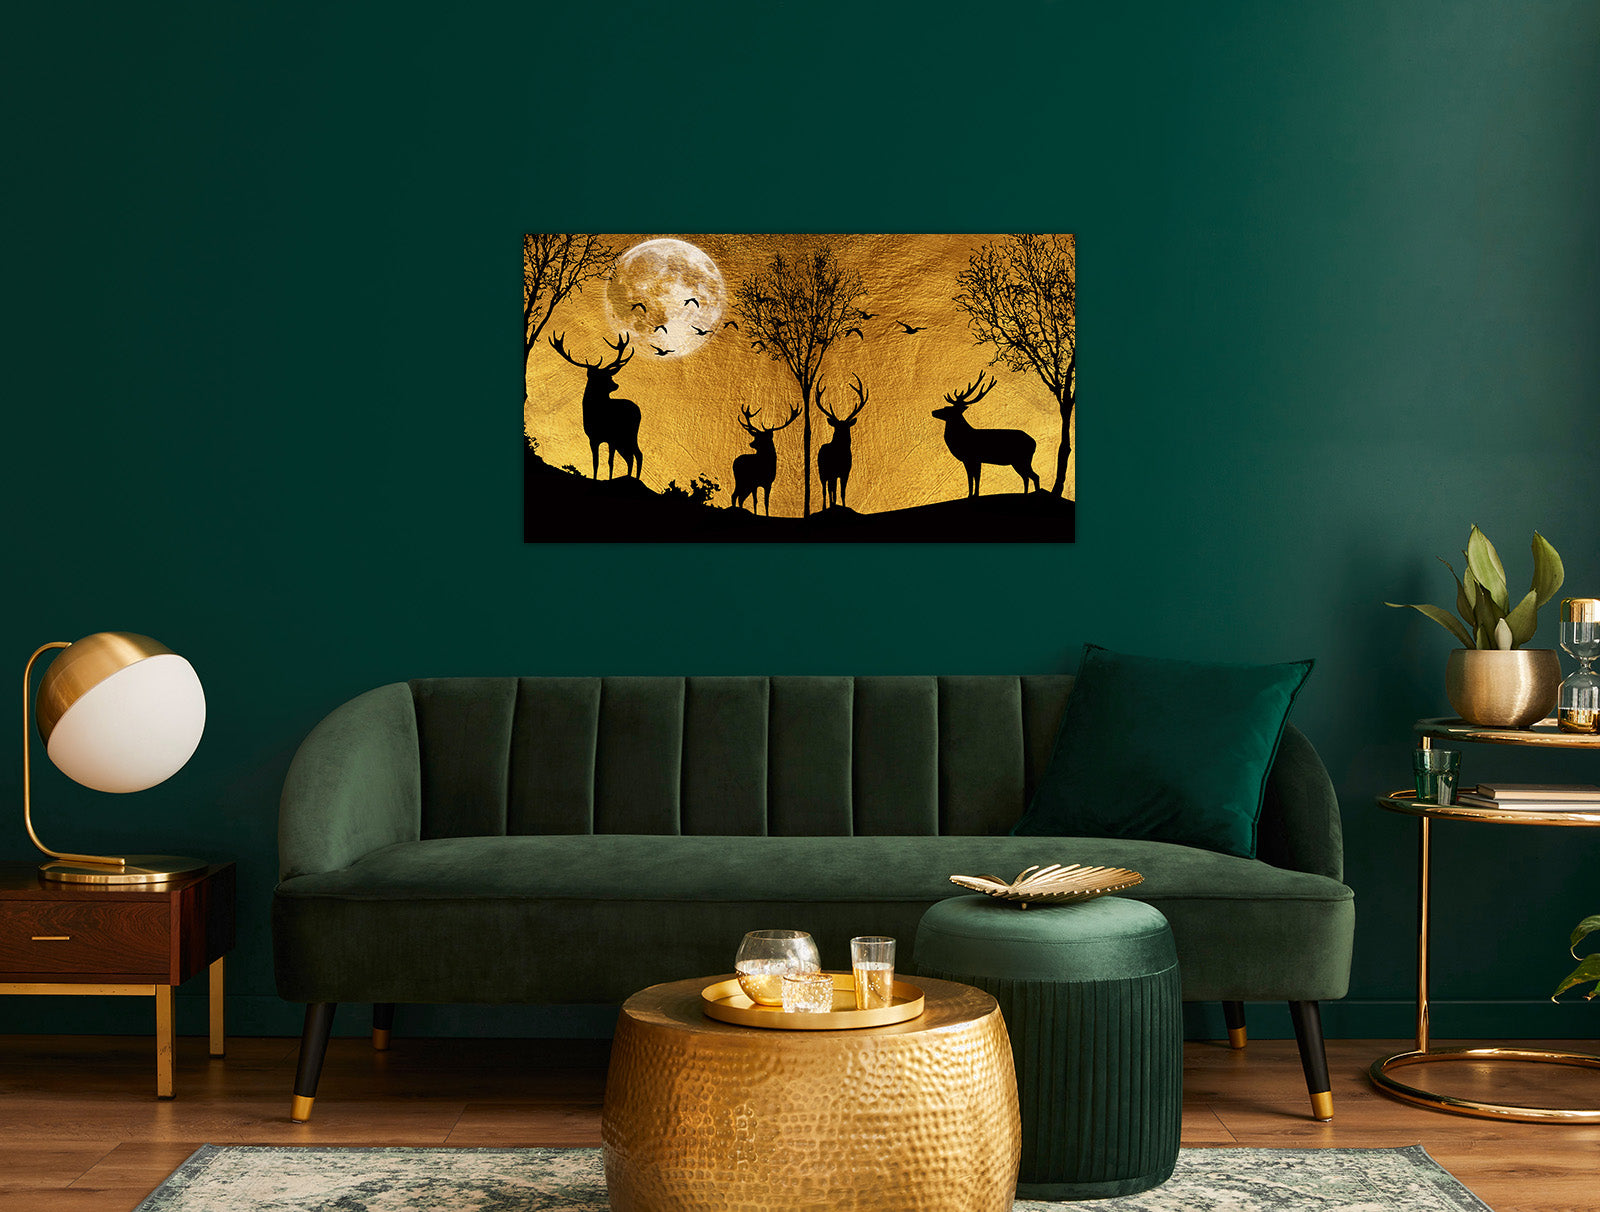 Black and Gold Wall Painting (Deer)